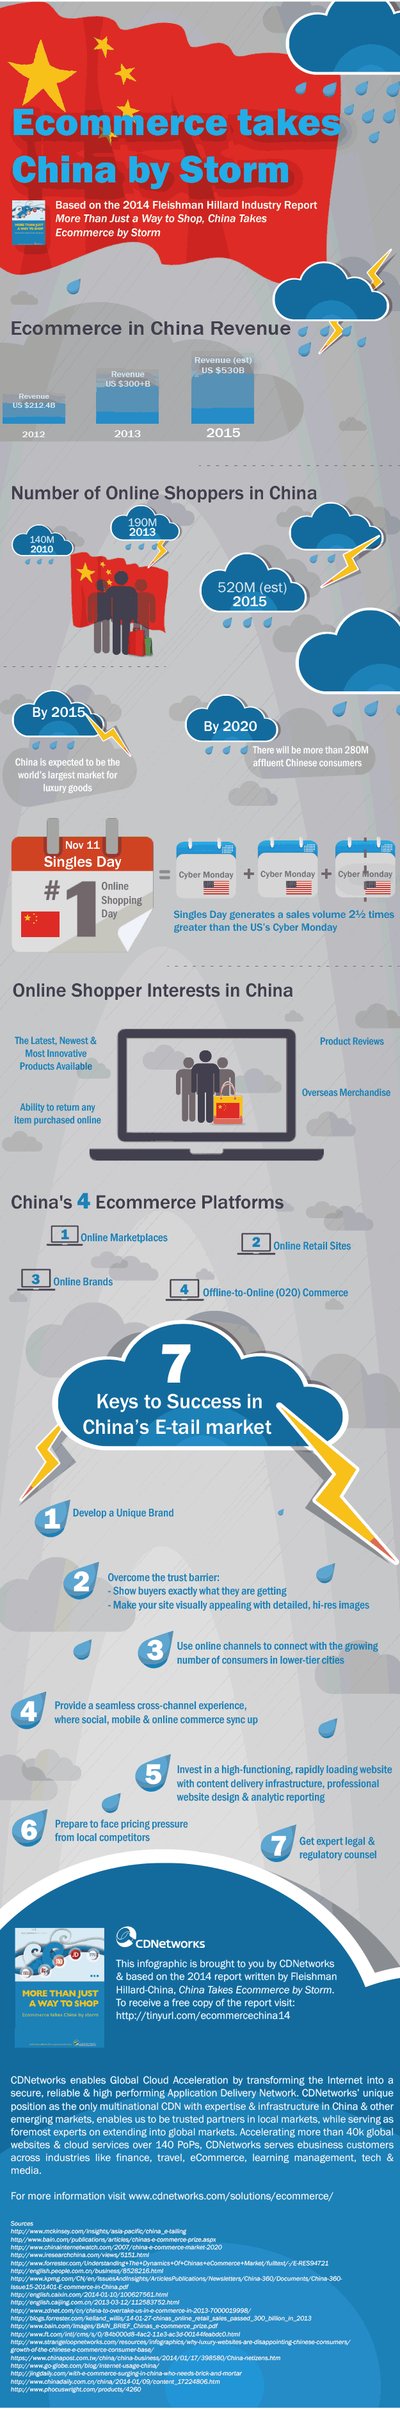 Ecommerce takes China by storm